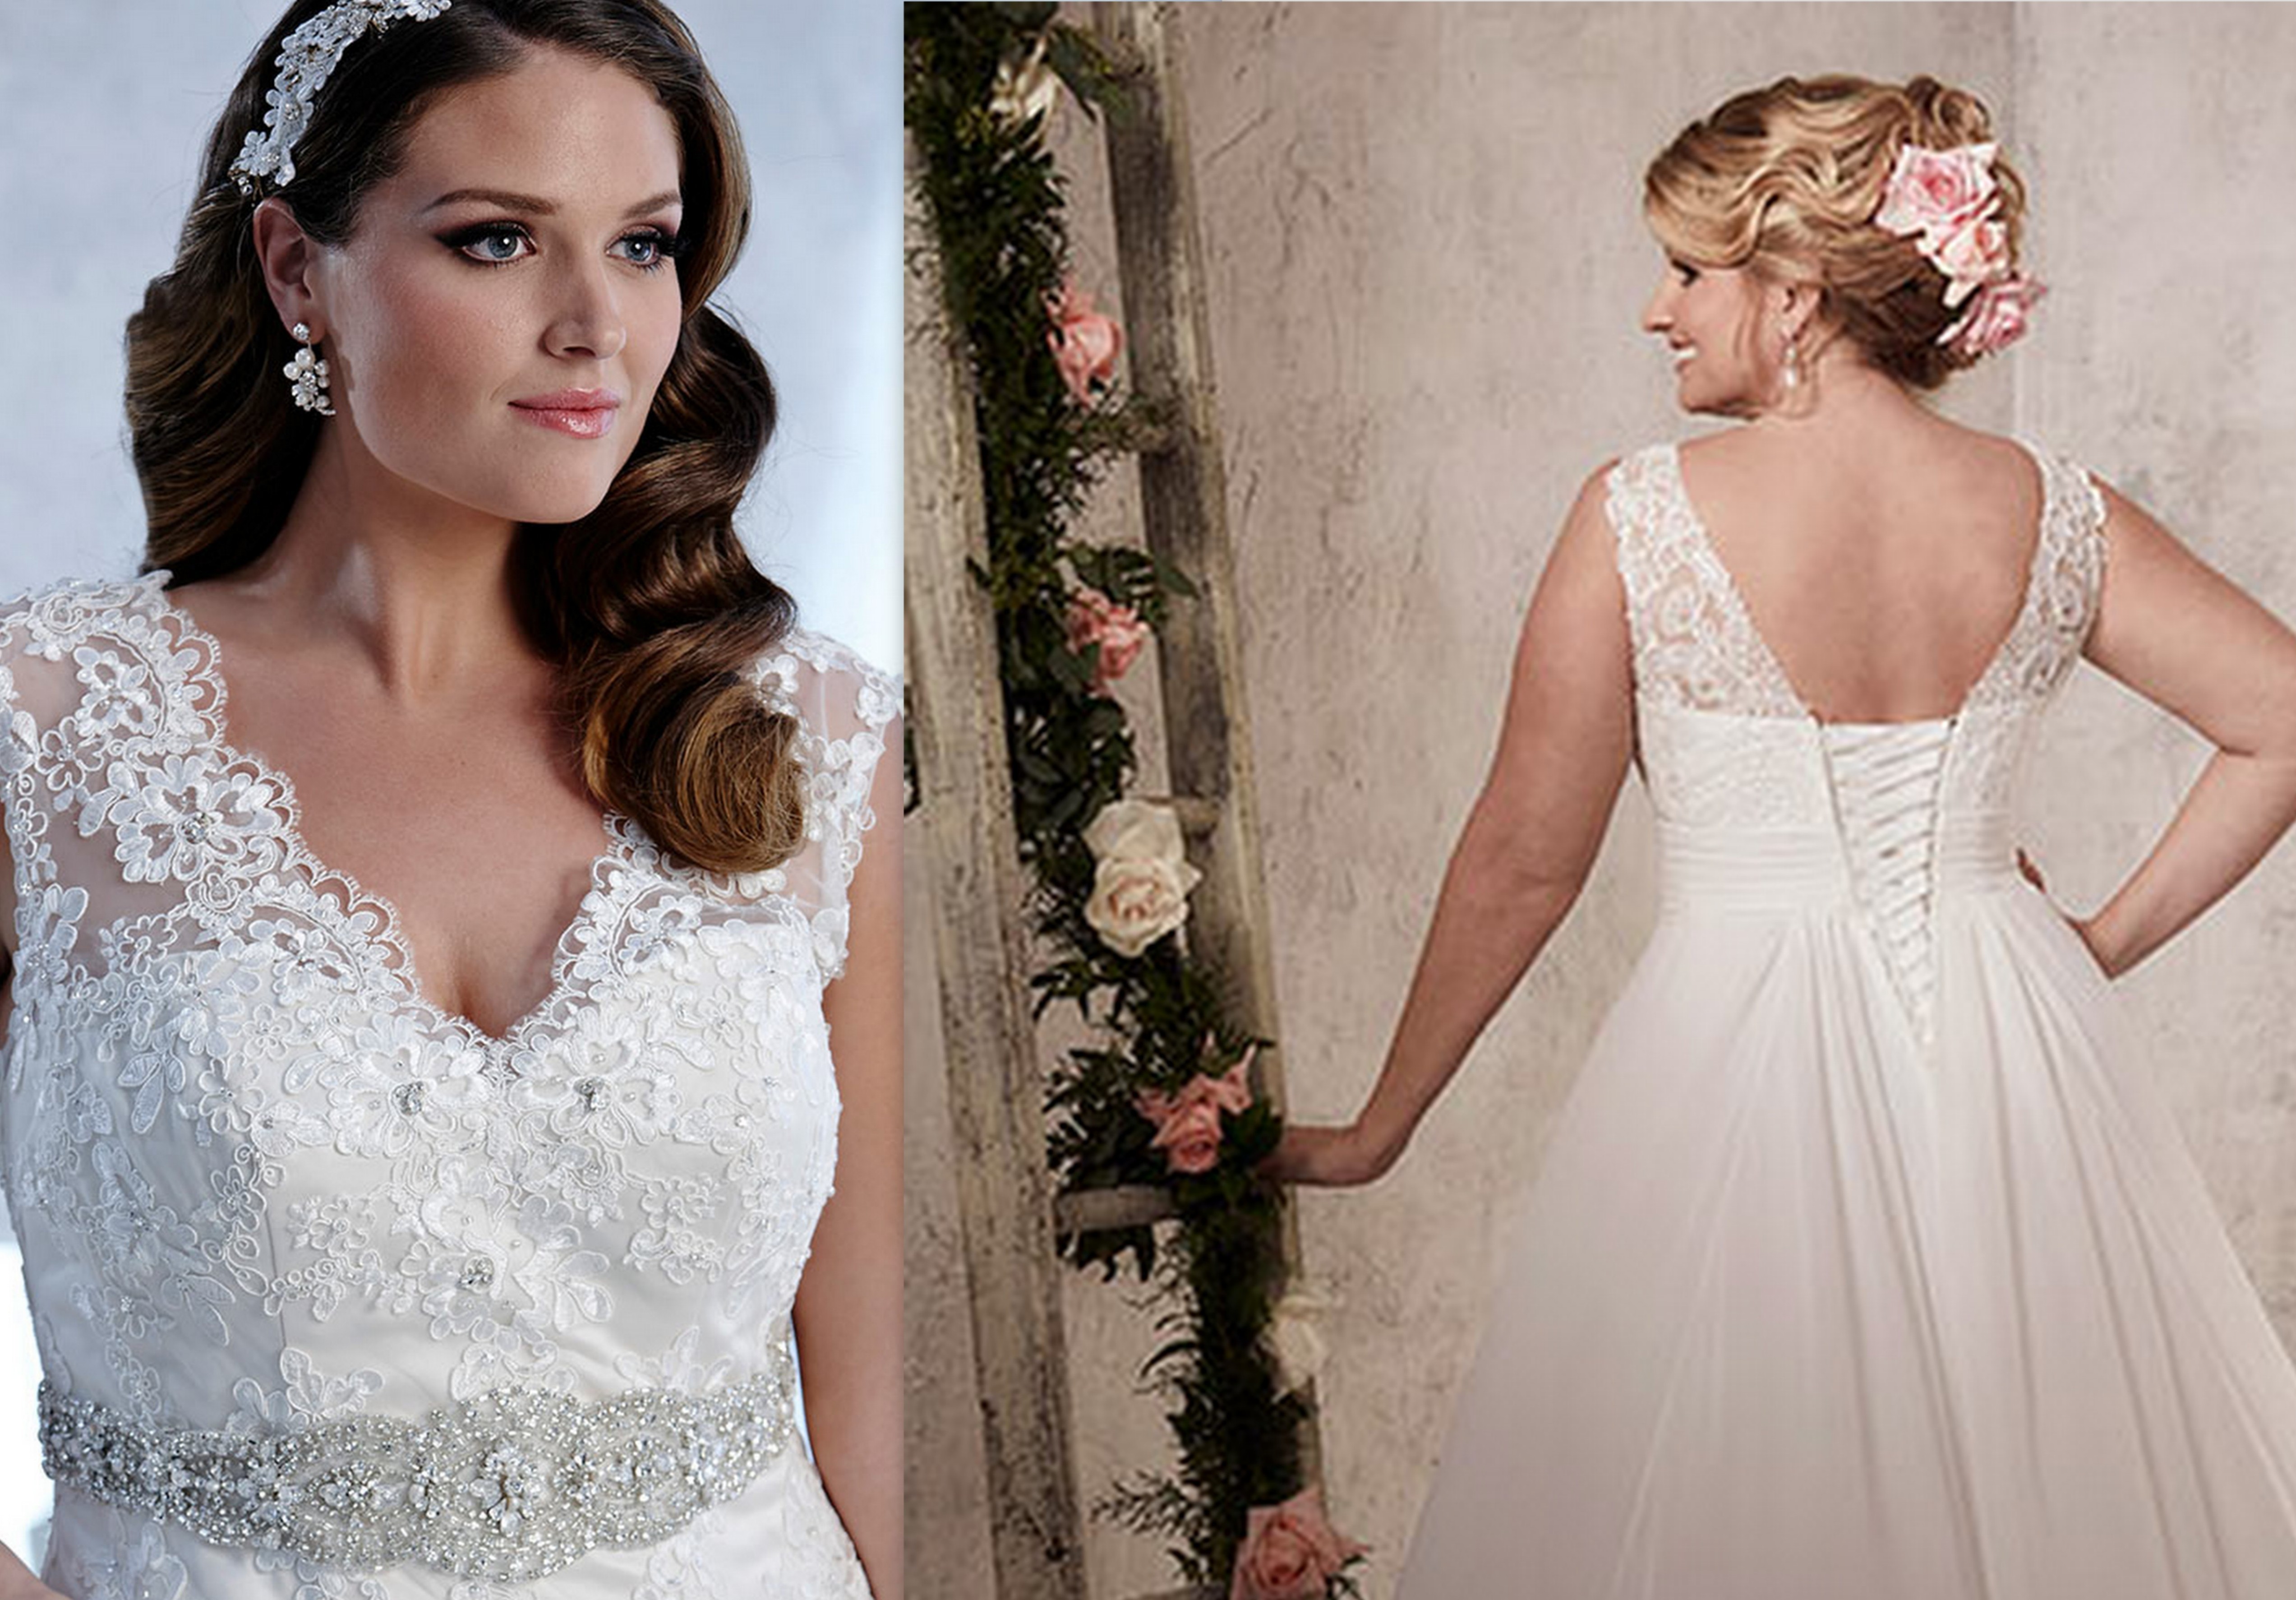 plus size wedding dresses for over 50